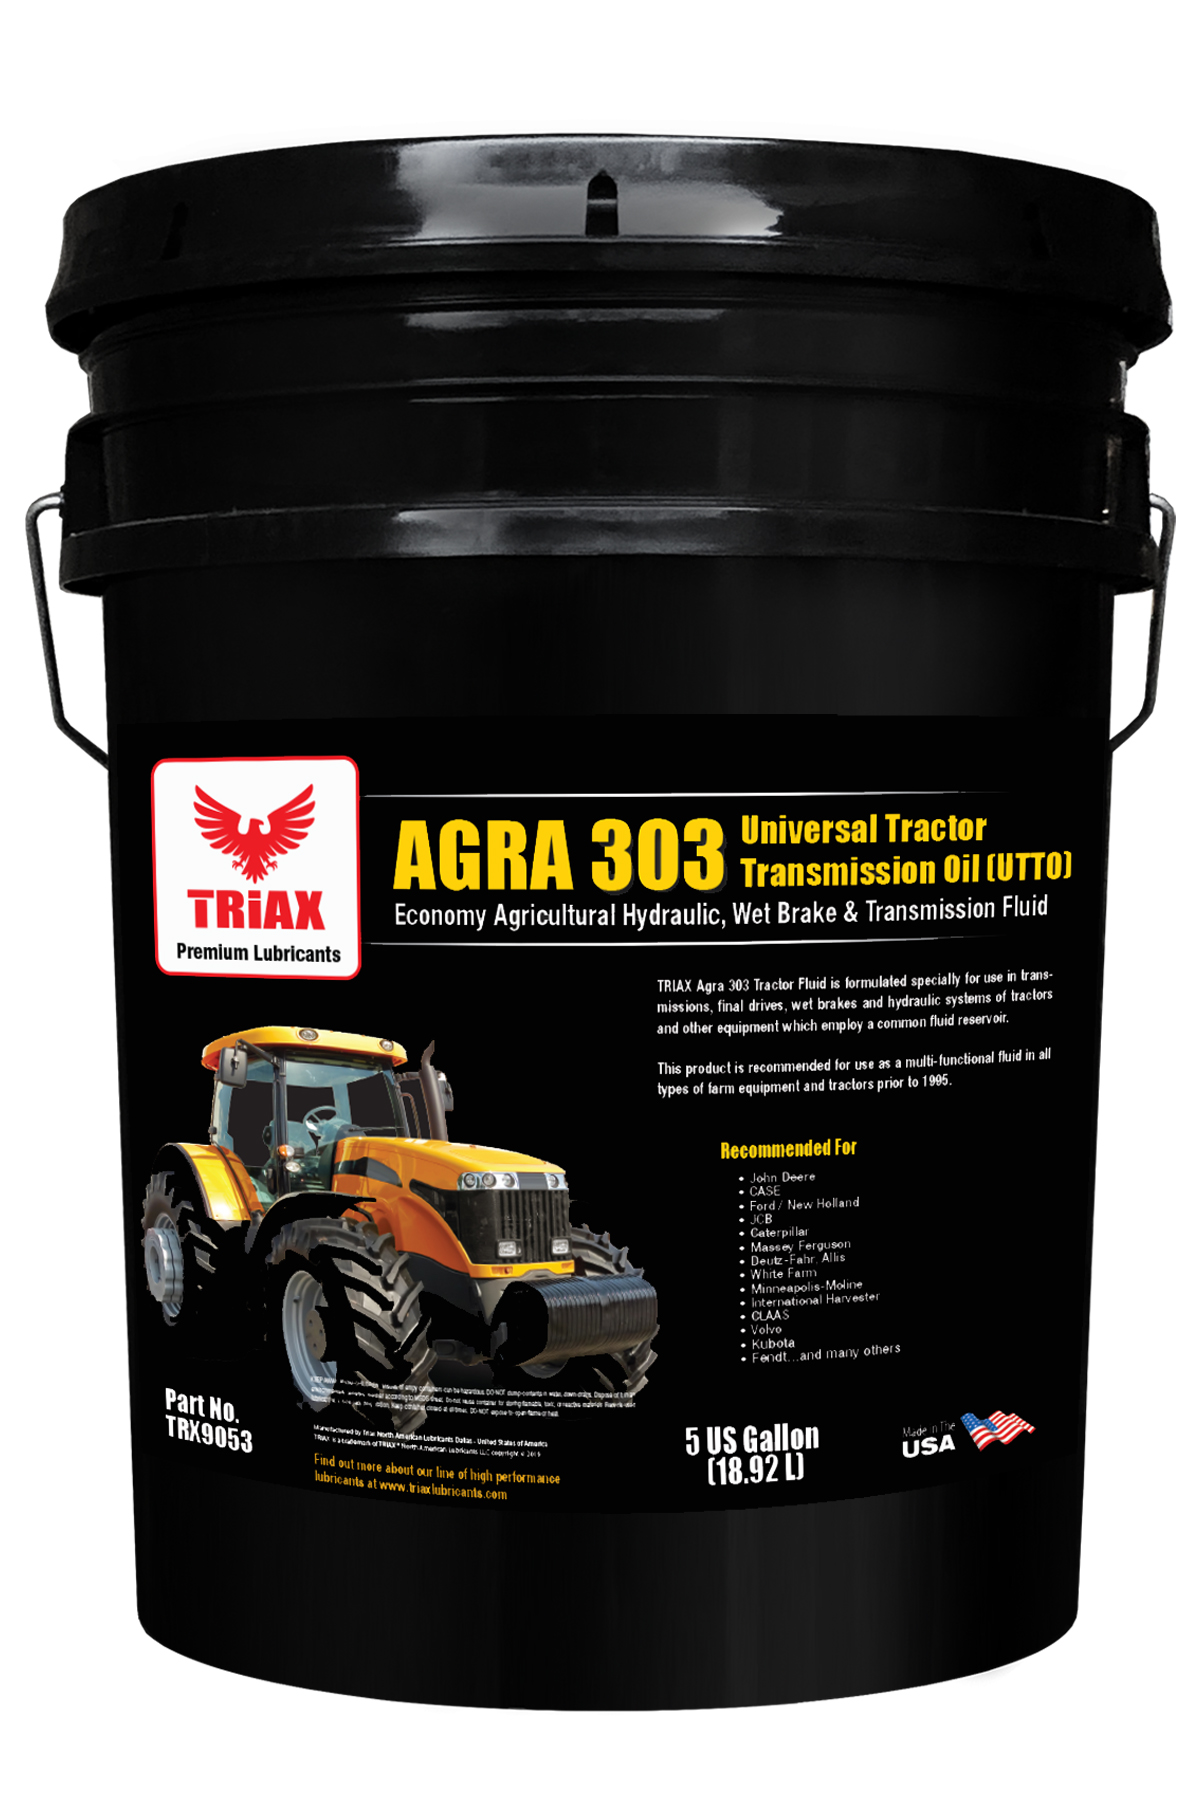 TRIAX AGRA 303 Universal Tractor Transmission Oil (UTTO)